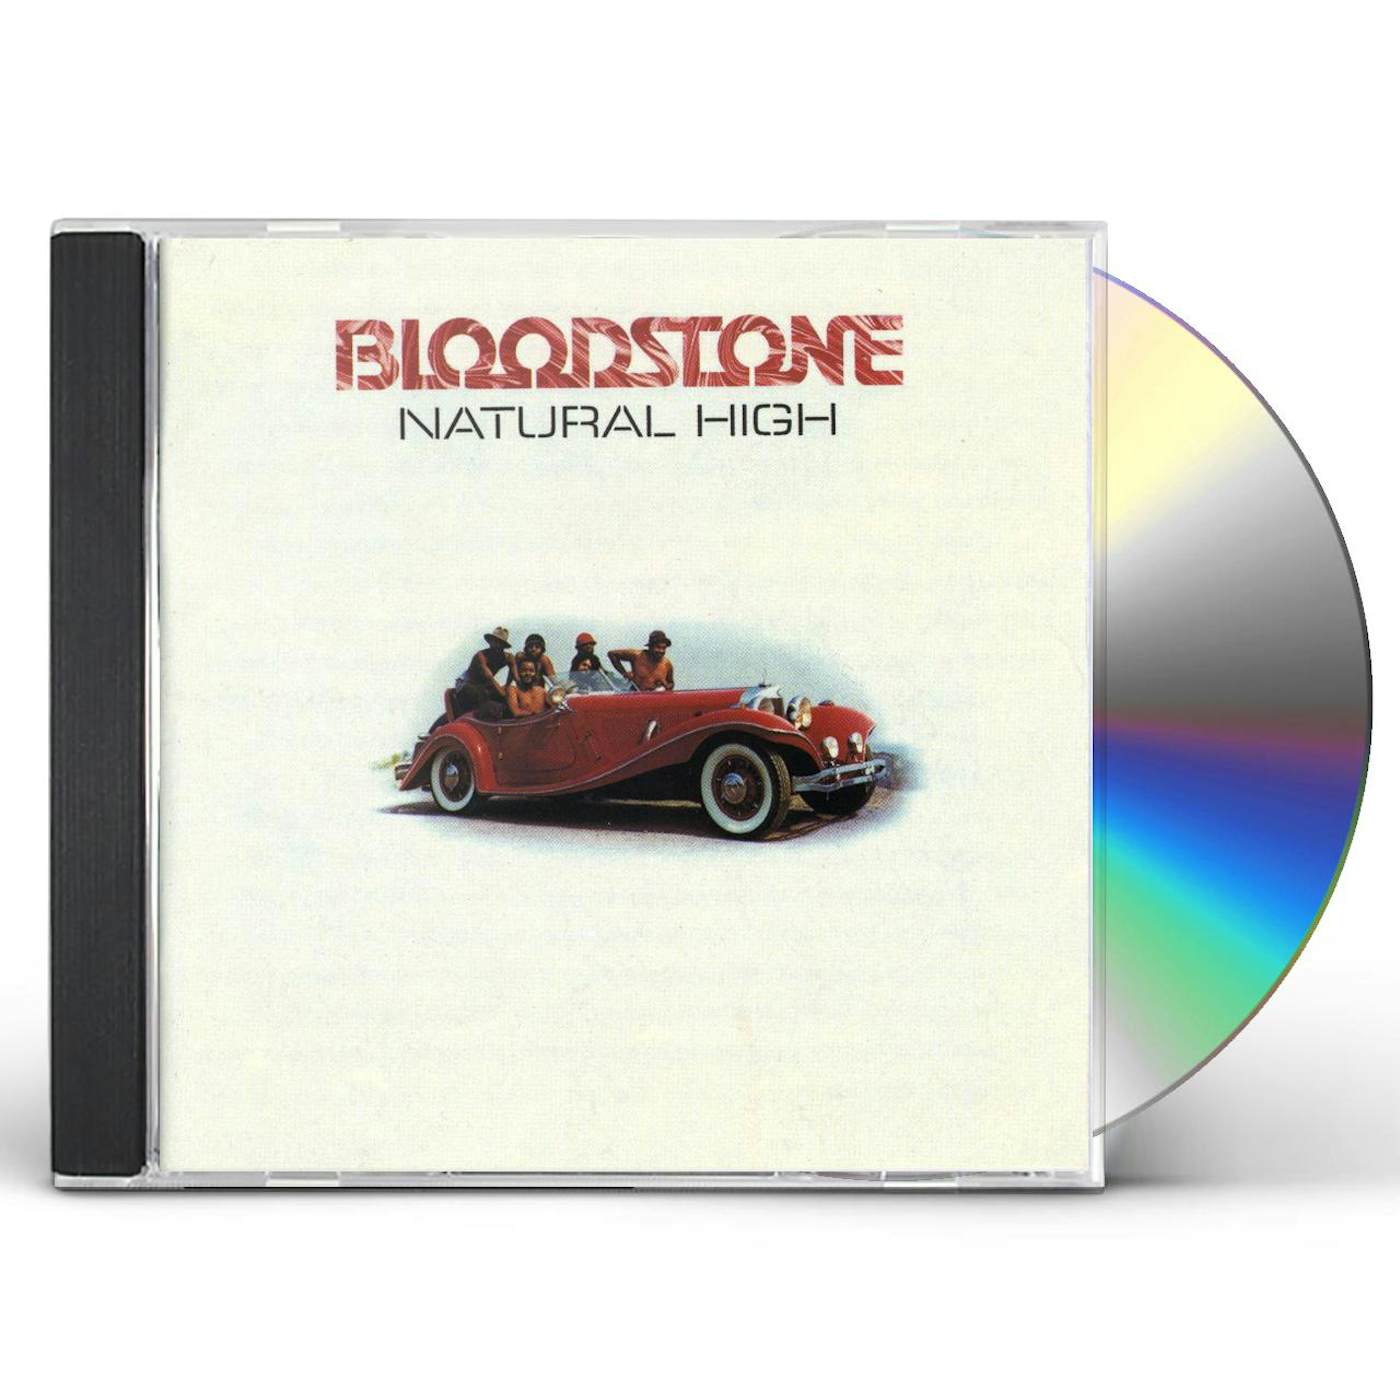 Bloodstone NATURAL HIGH CD